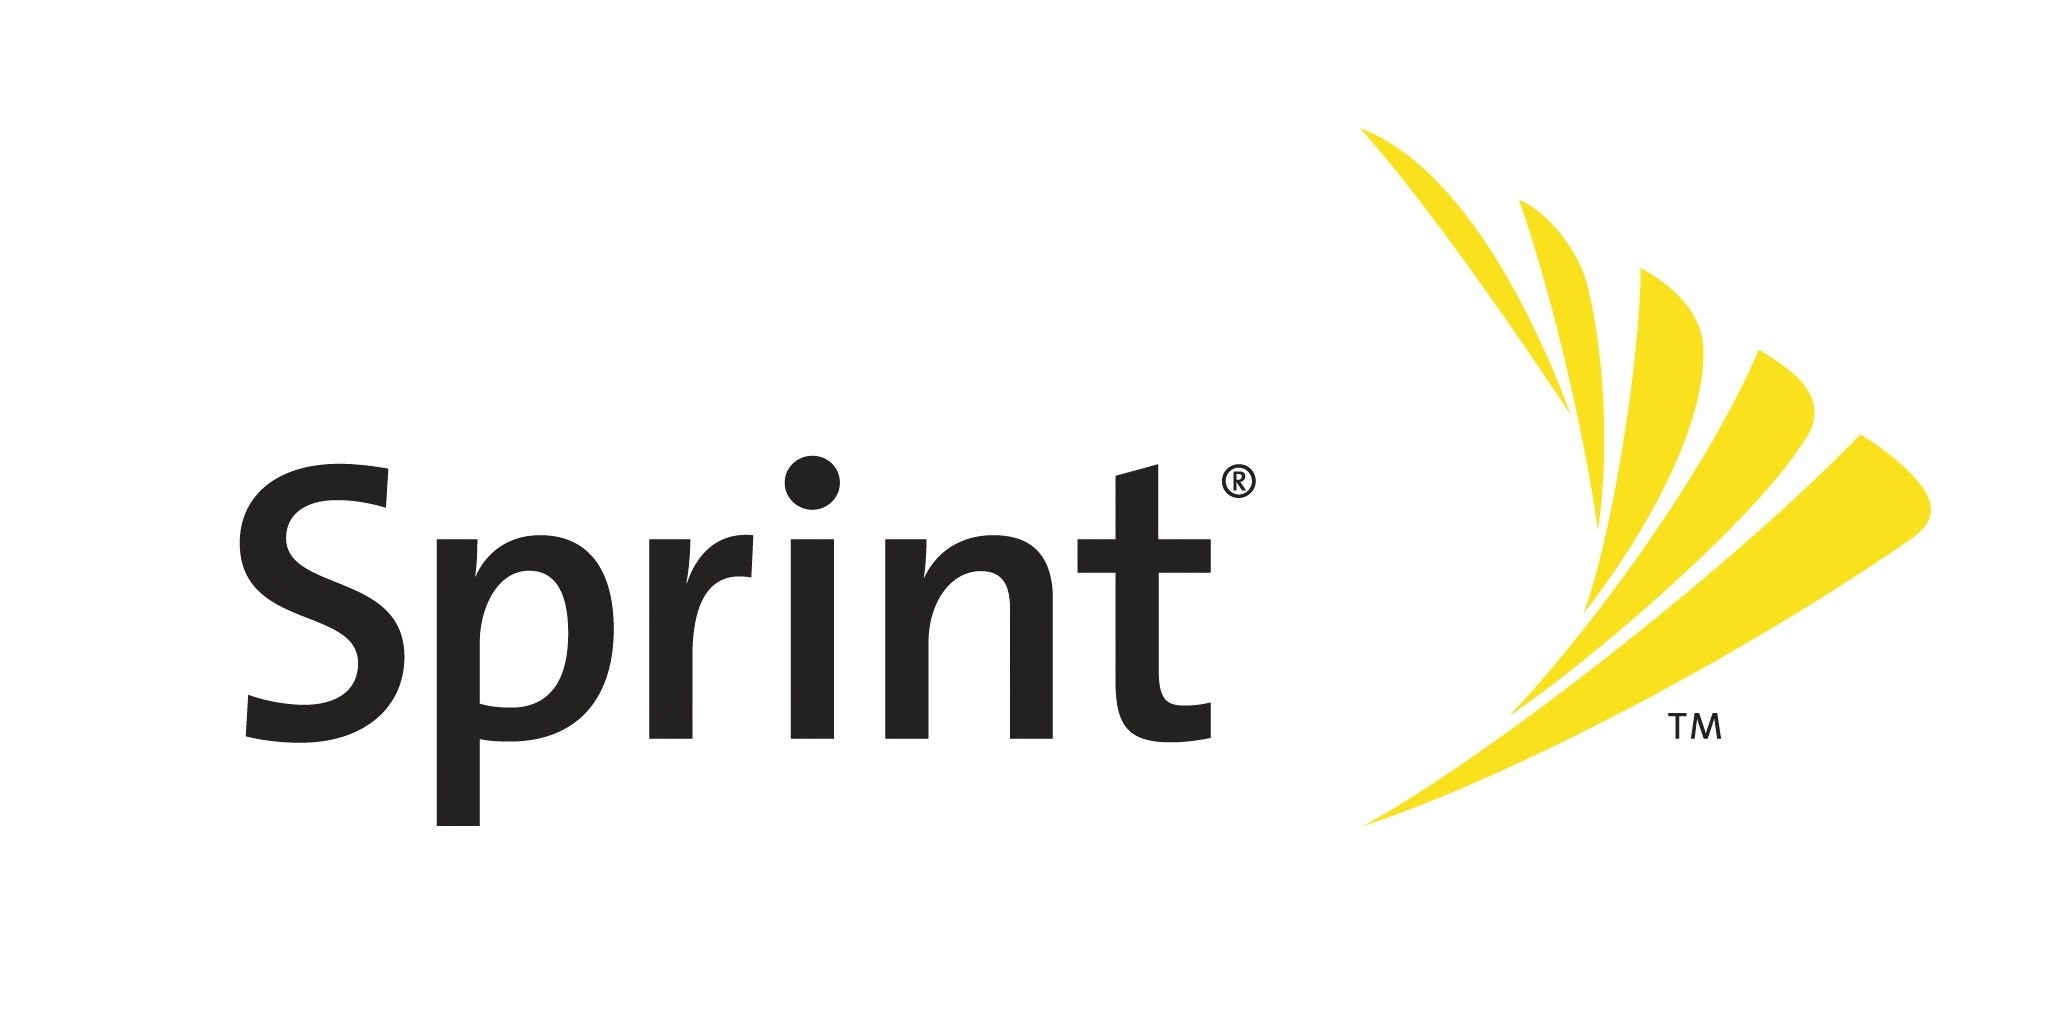 Sprint Plans to Launch NFC Mobile Wallet as U.S. Wallet War Continues to Heat Up